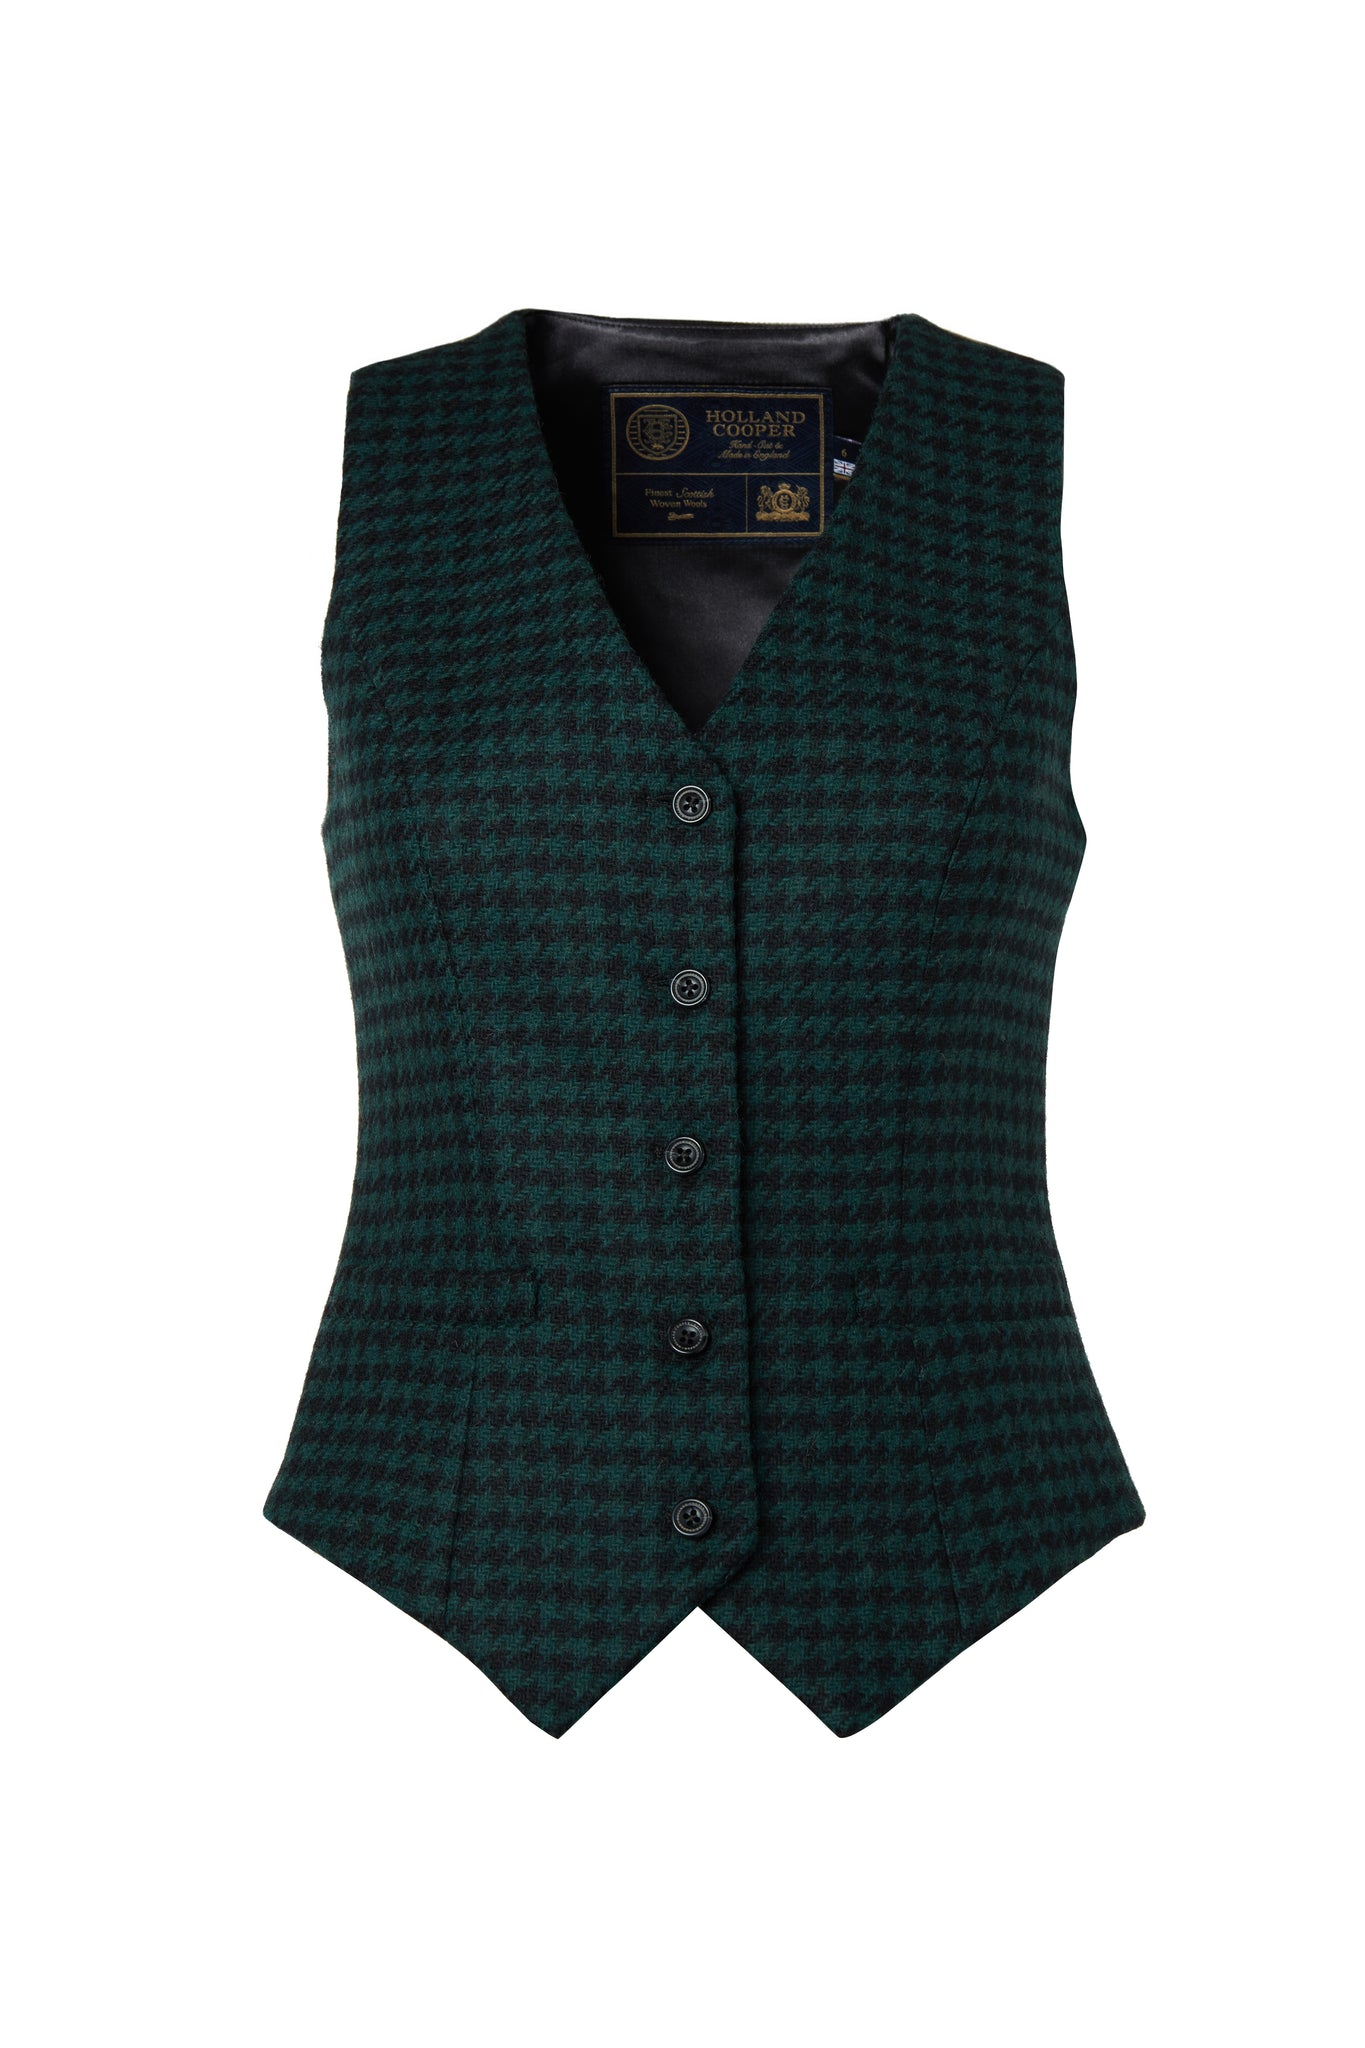 The Emerald Houndstooth Suit